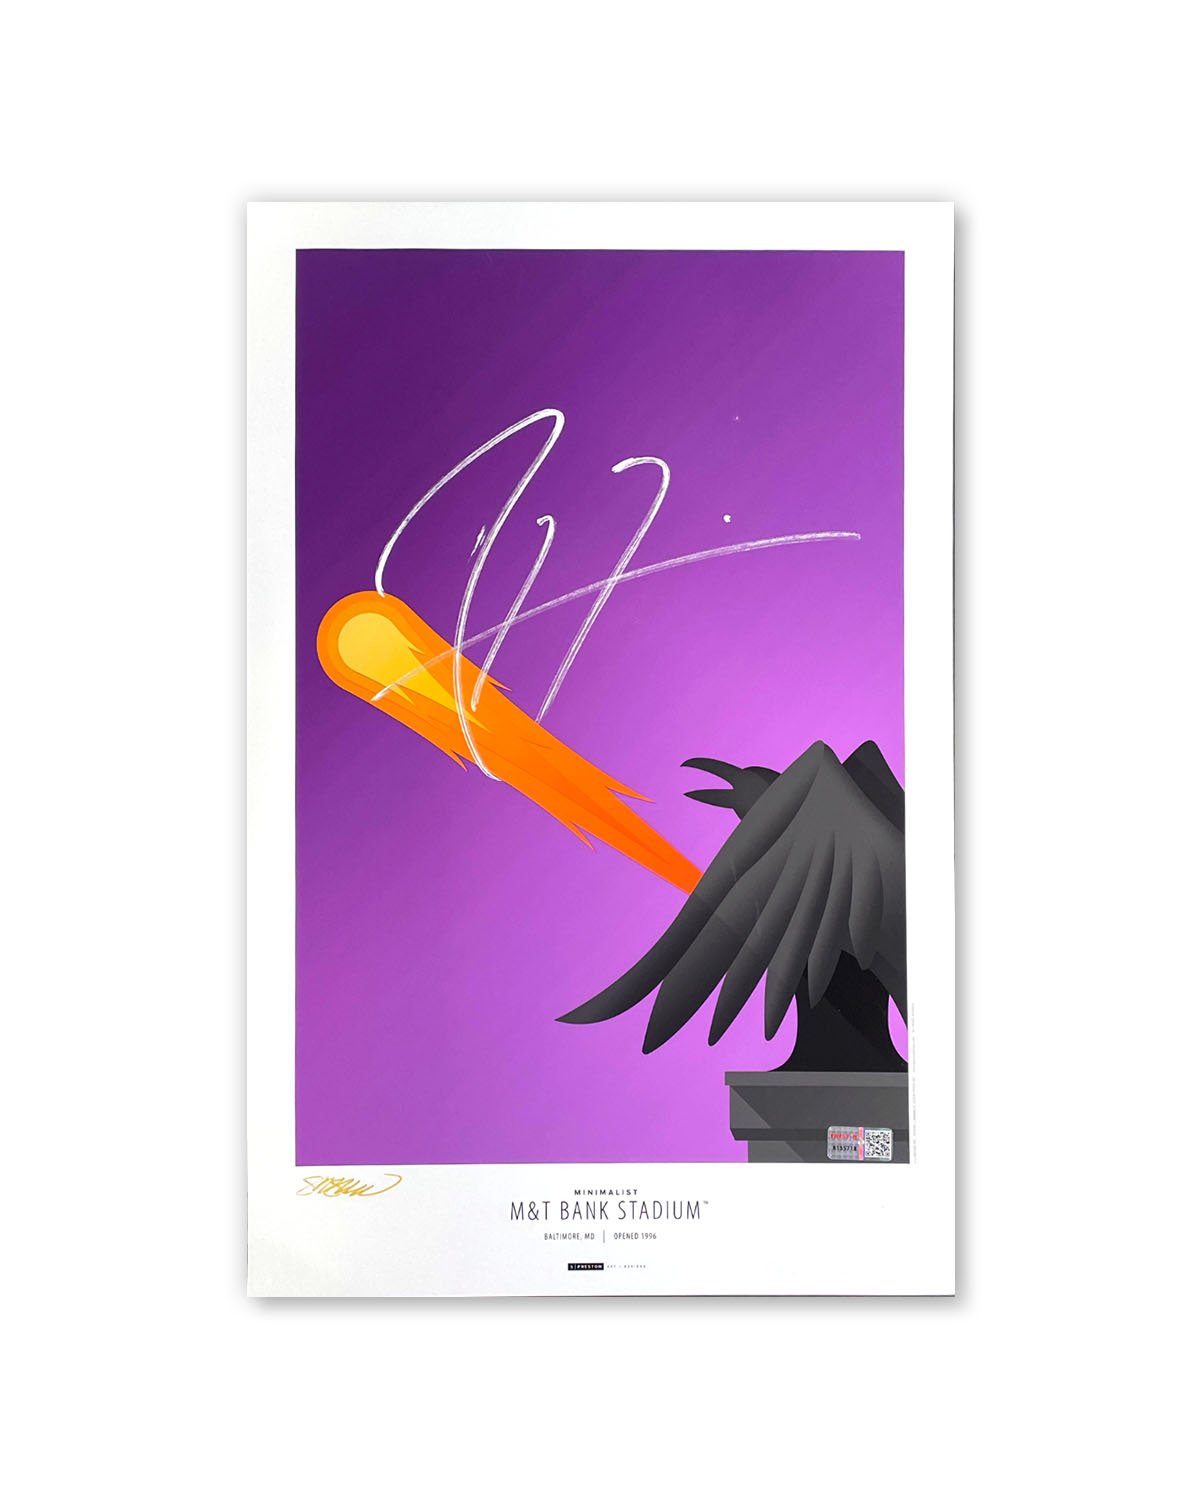 Minimalist M&T Bank Stadium - Ray Lewis Autographed - Poster Print - Authenticated